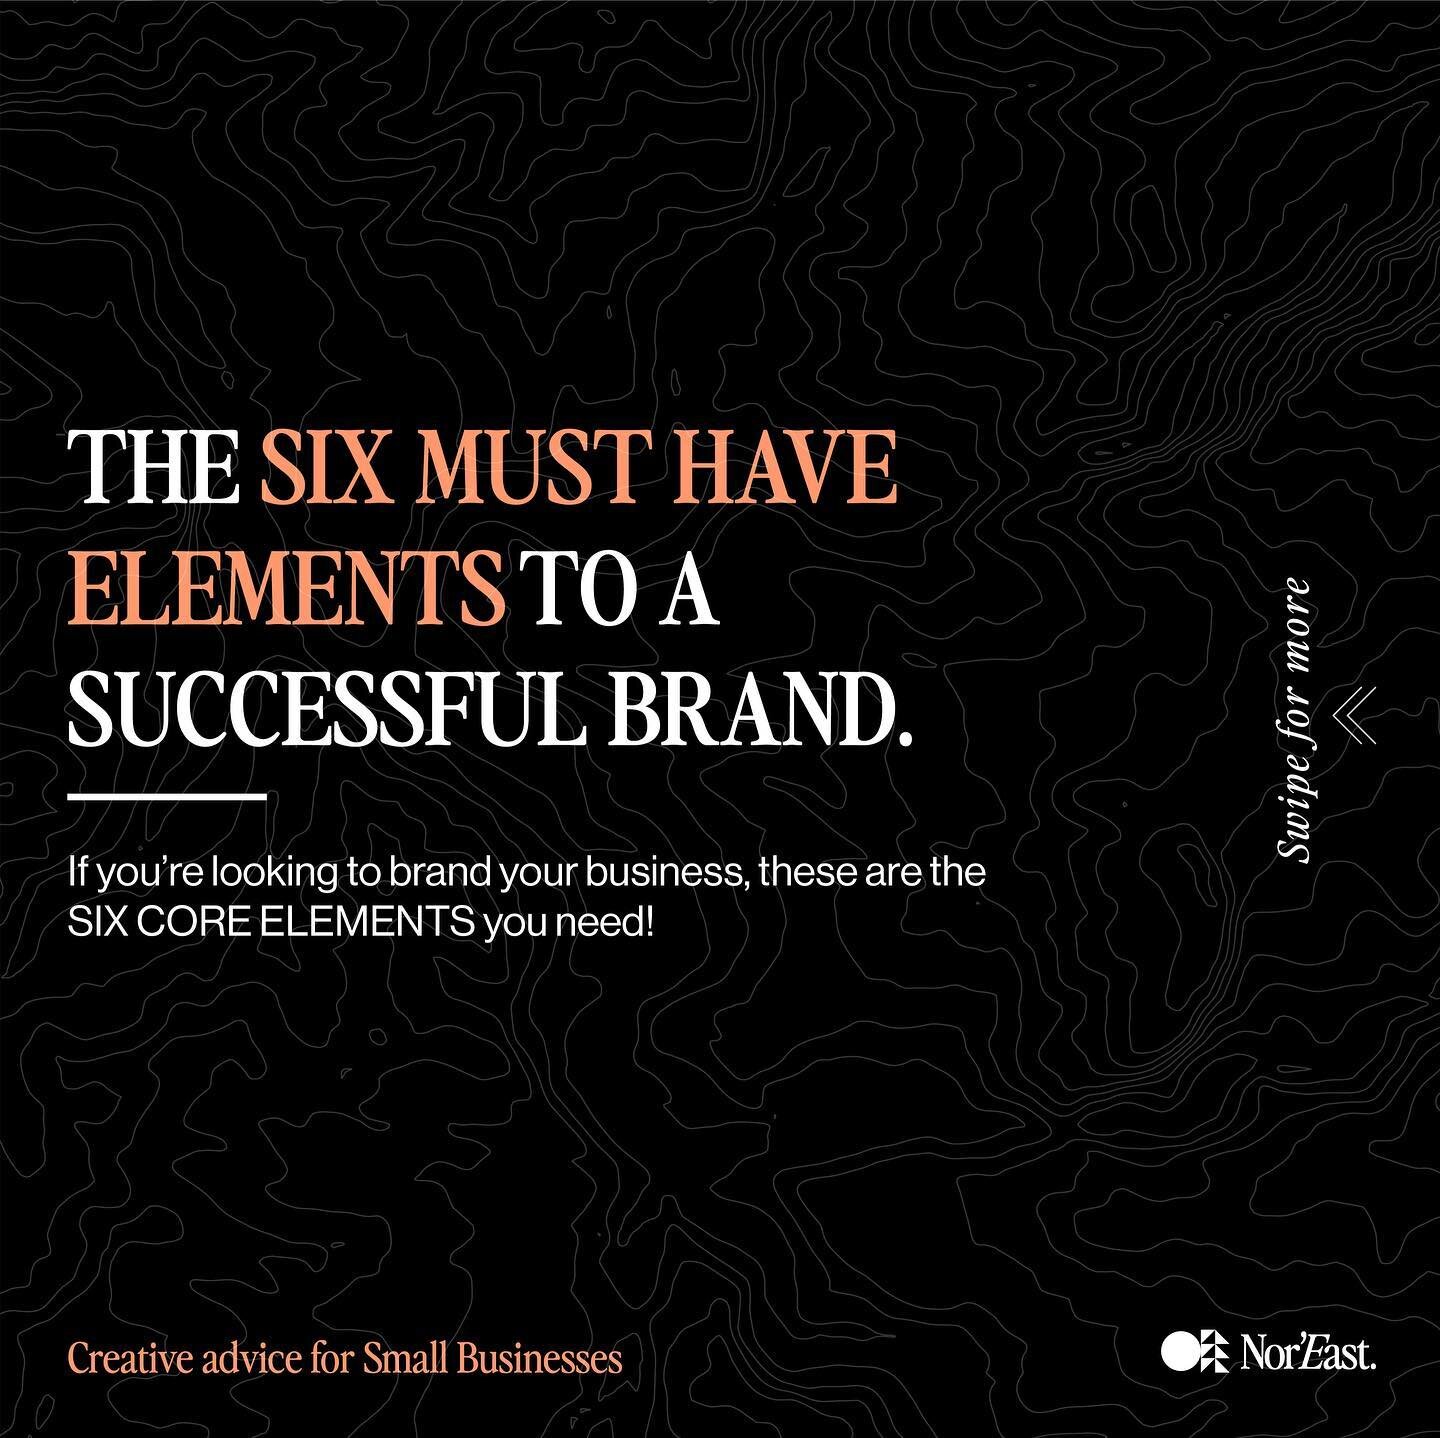 Six MUST HAVES to branding your business in 2023! Non-negotiables to drive success in all your future marketing, advertising, selling.
-
-
#designfortheadventurous #newcastlebusiness #smallbusinessaustralia #lakemacquarie #newcastle #businesstips #no